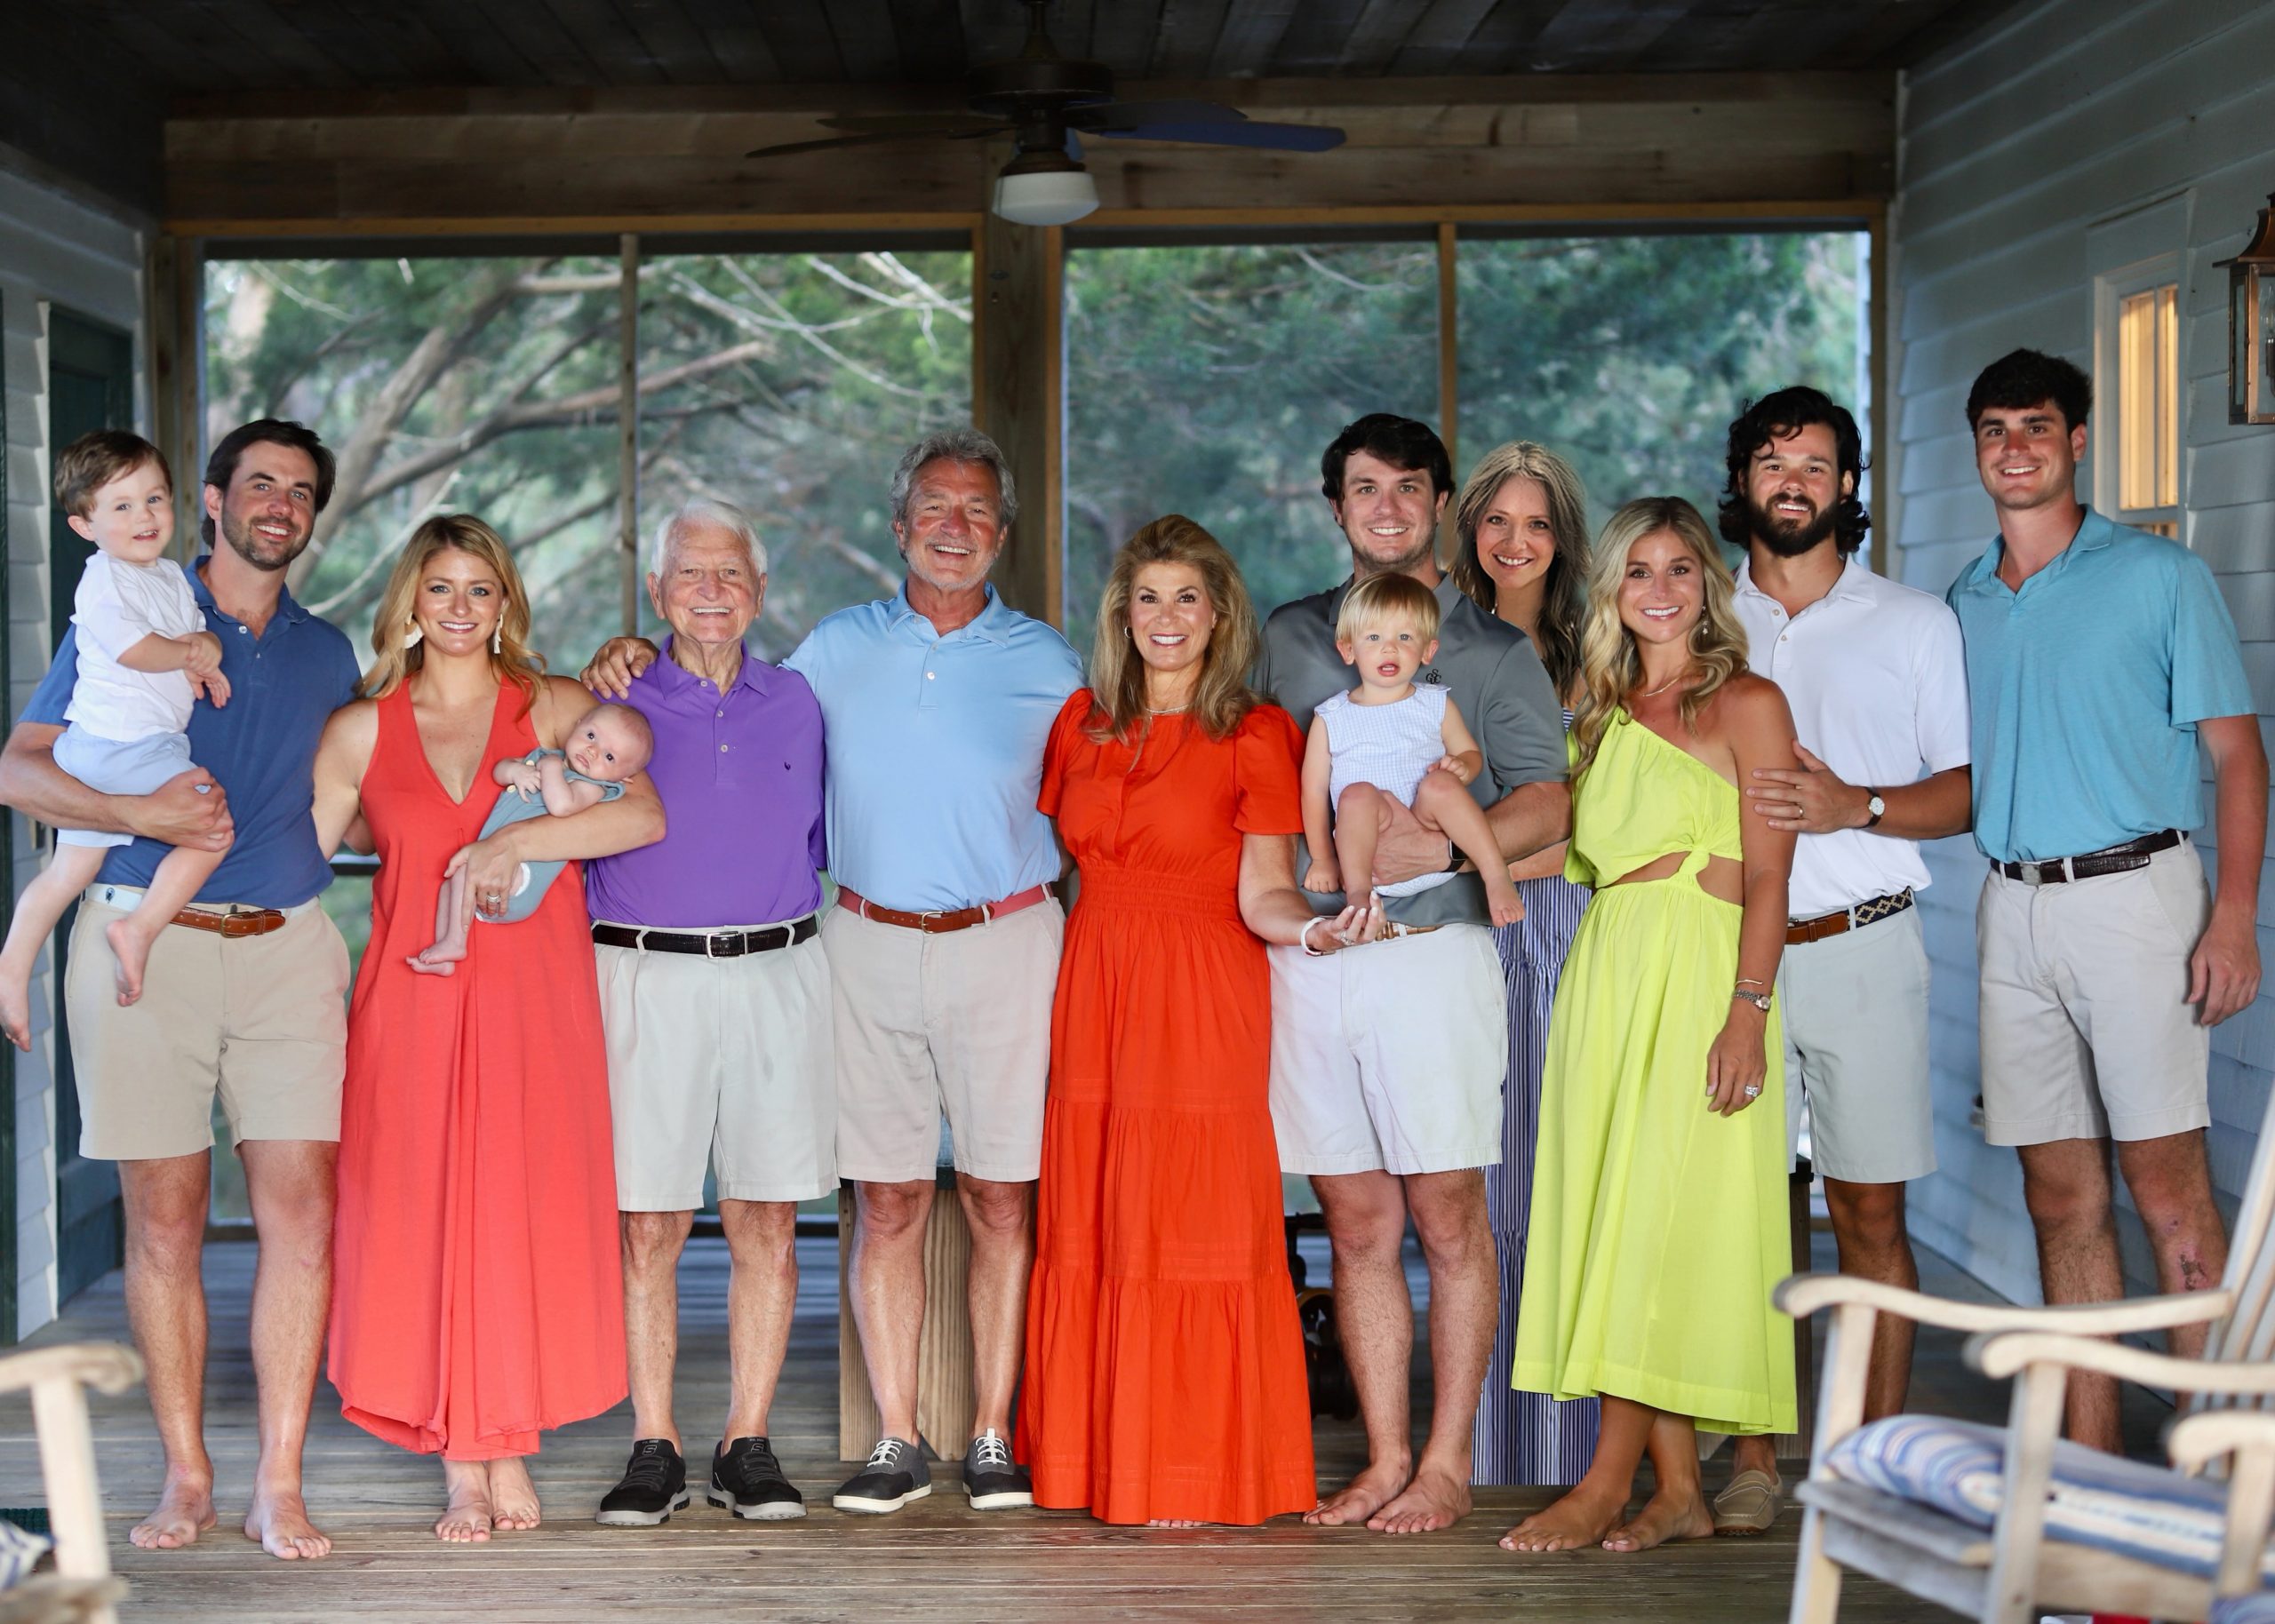 The Theodore family: Spencer Green holding Mac; Rossi Green holding Teddy; Nick Theodore; Drew and Elyse Theodore; Nick Theodore, Jr., holding Andrew; Stephanie Theodore; Georgia and James Williams; Jack Theodore.